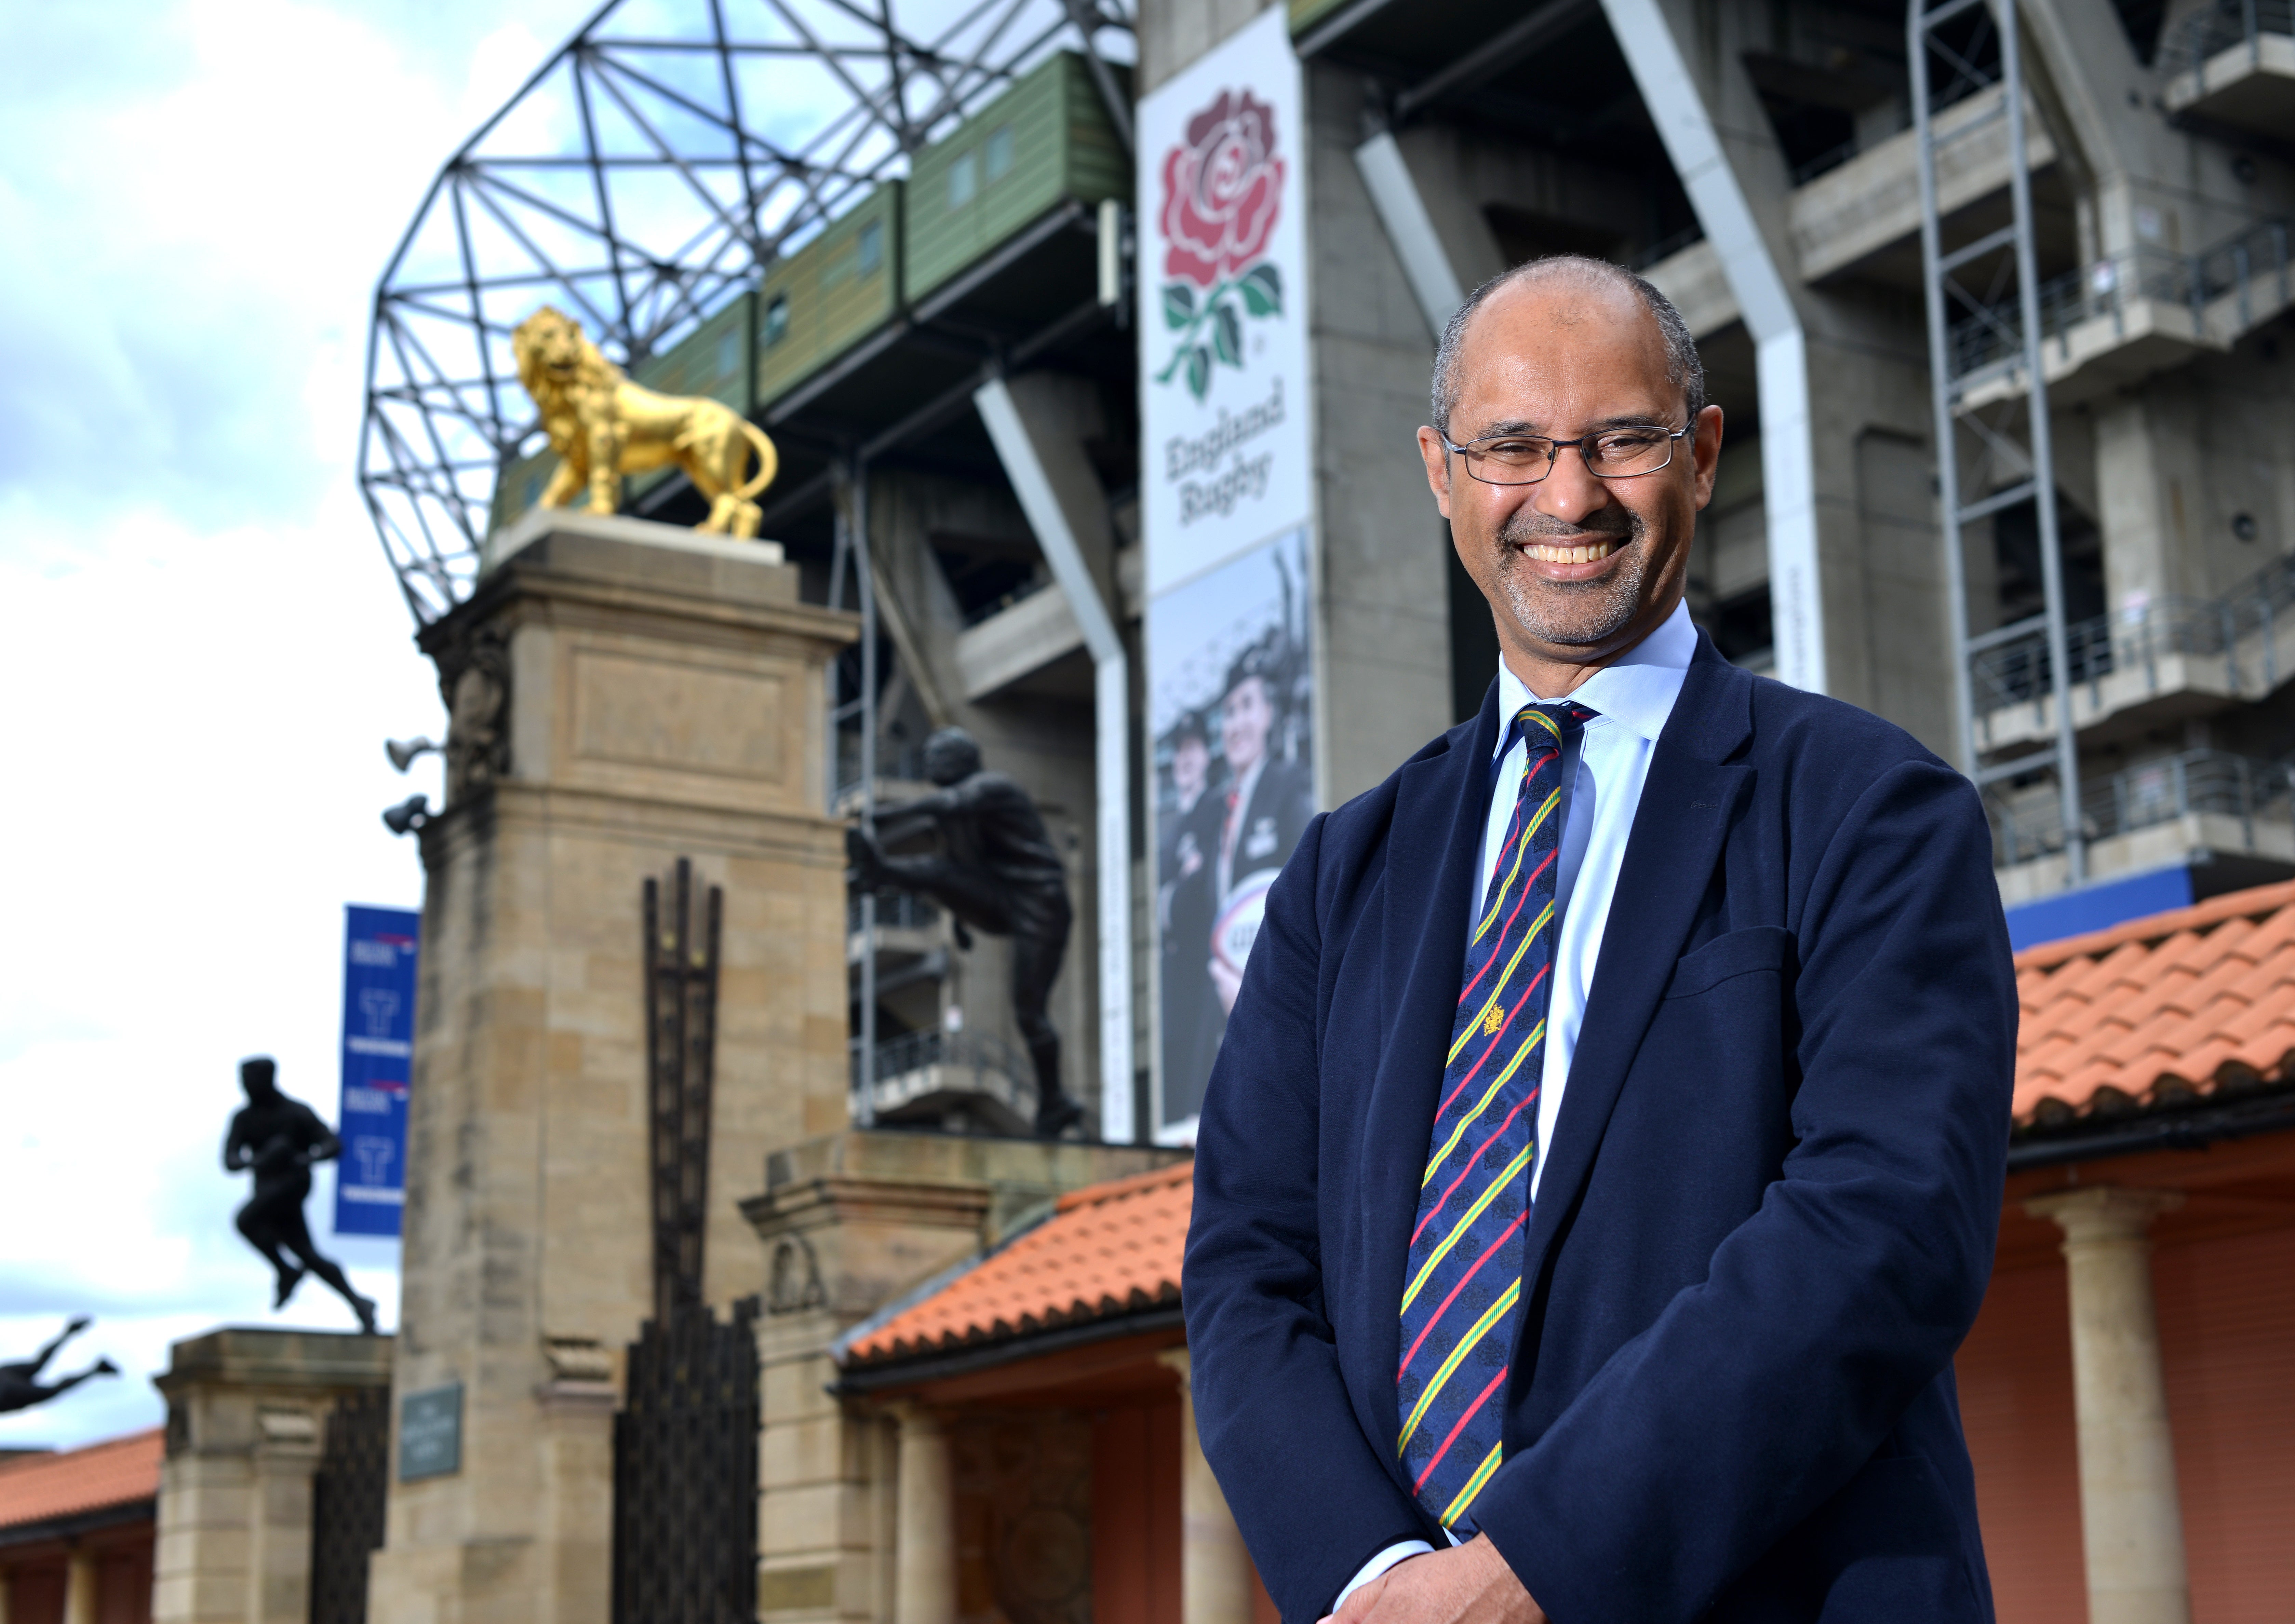 Tom Ilube is the new chair of the Rugby Football Union